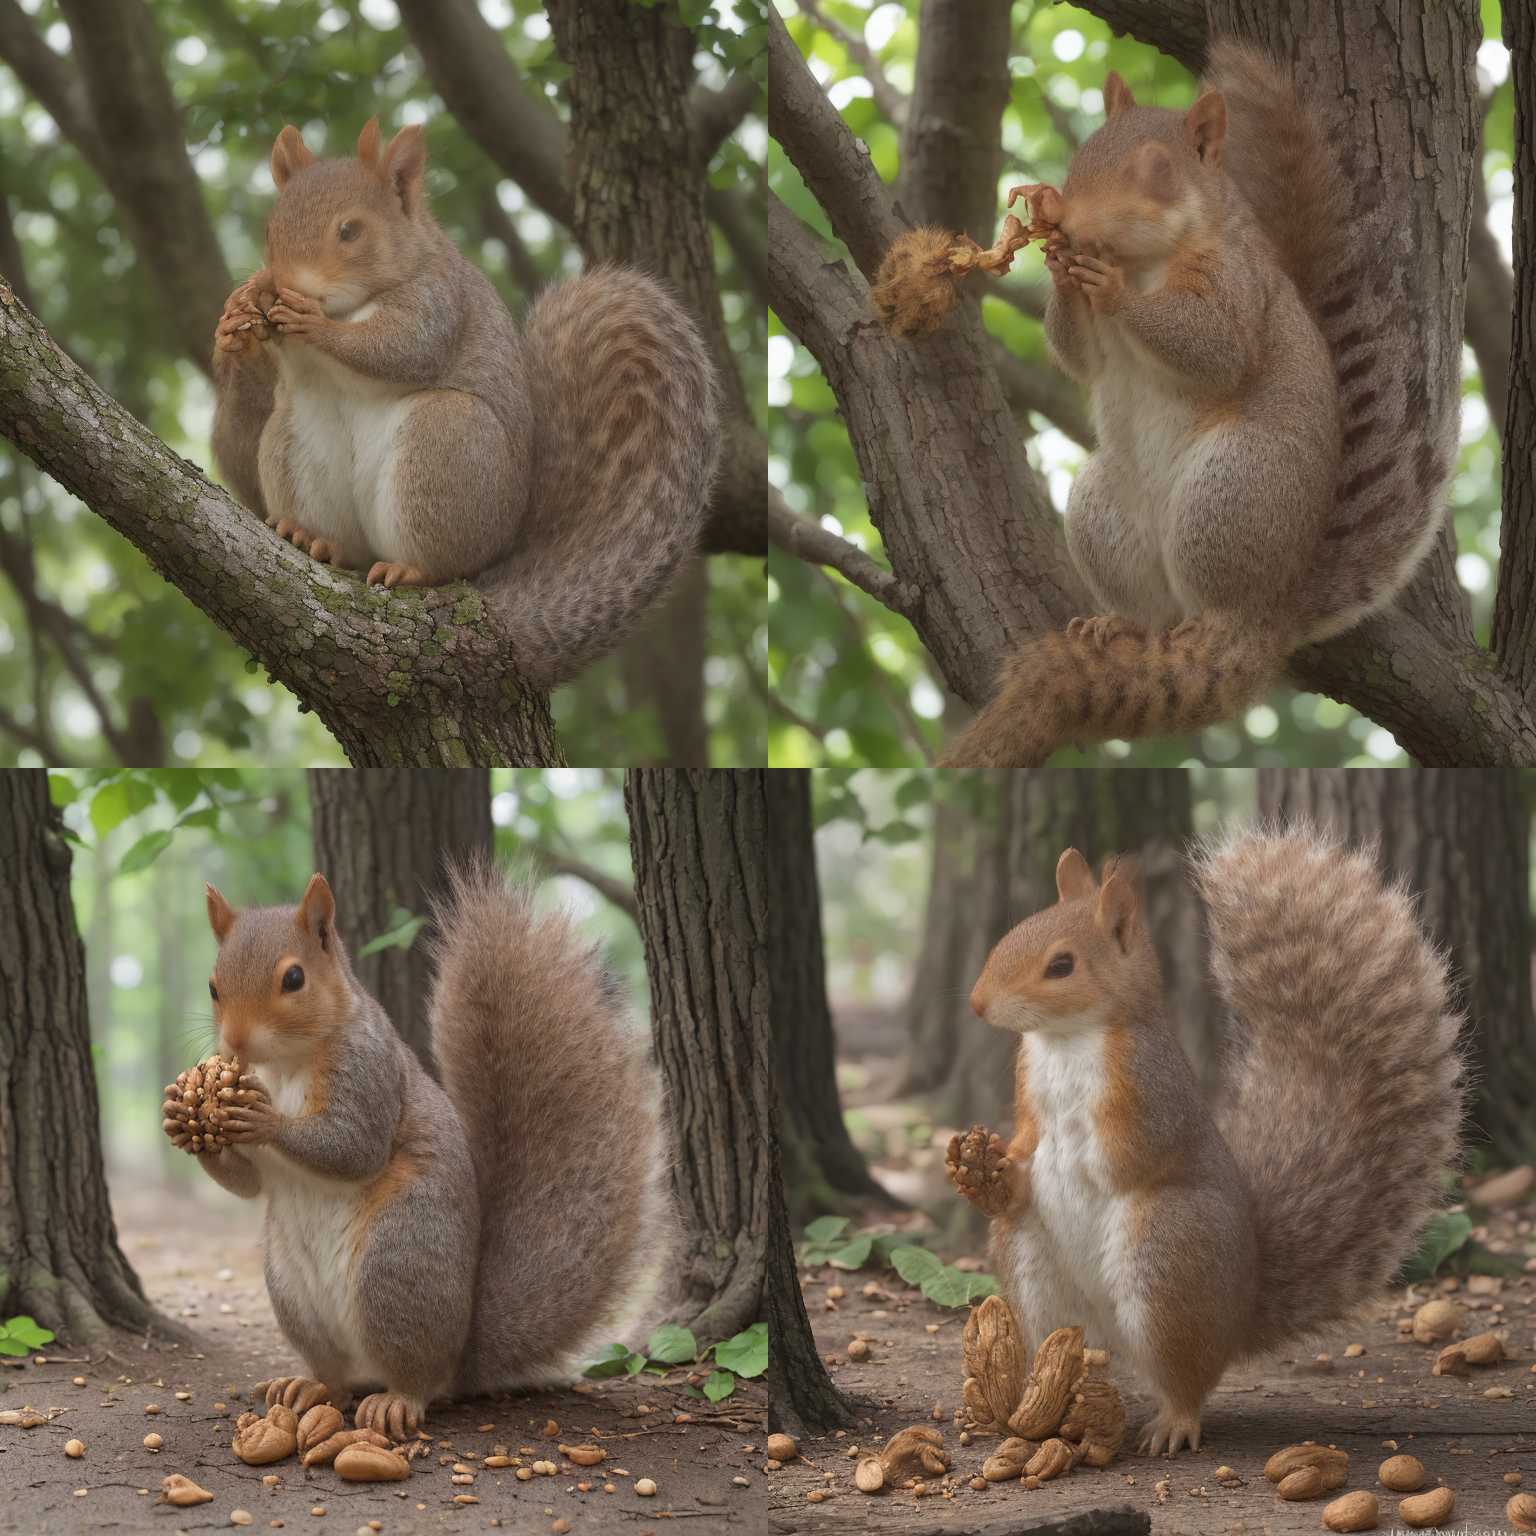 A squirrel eating a nut